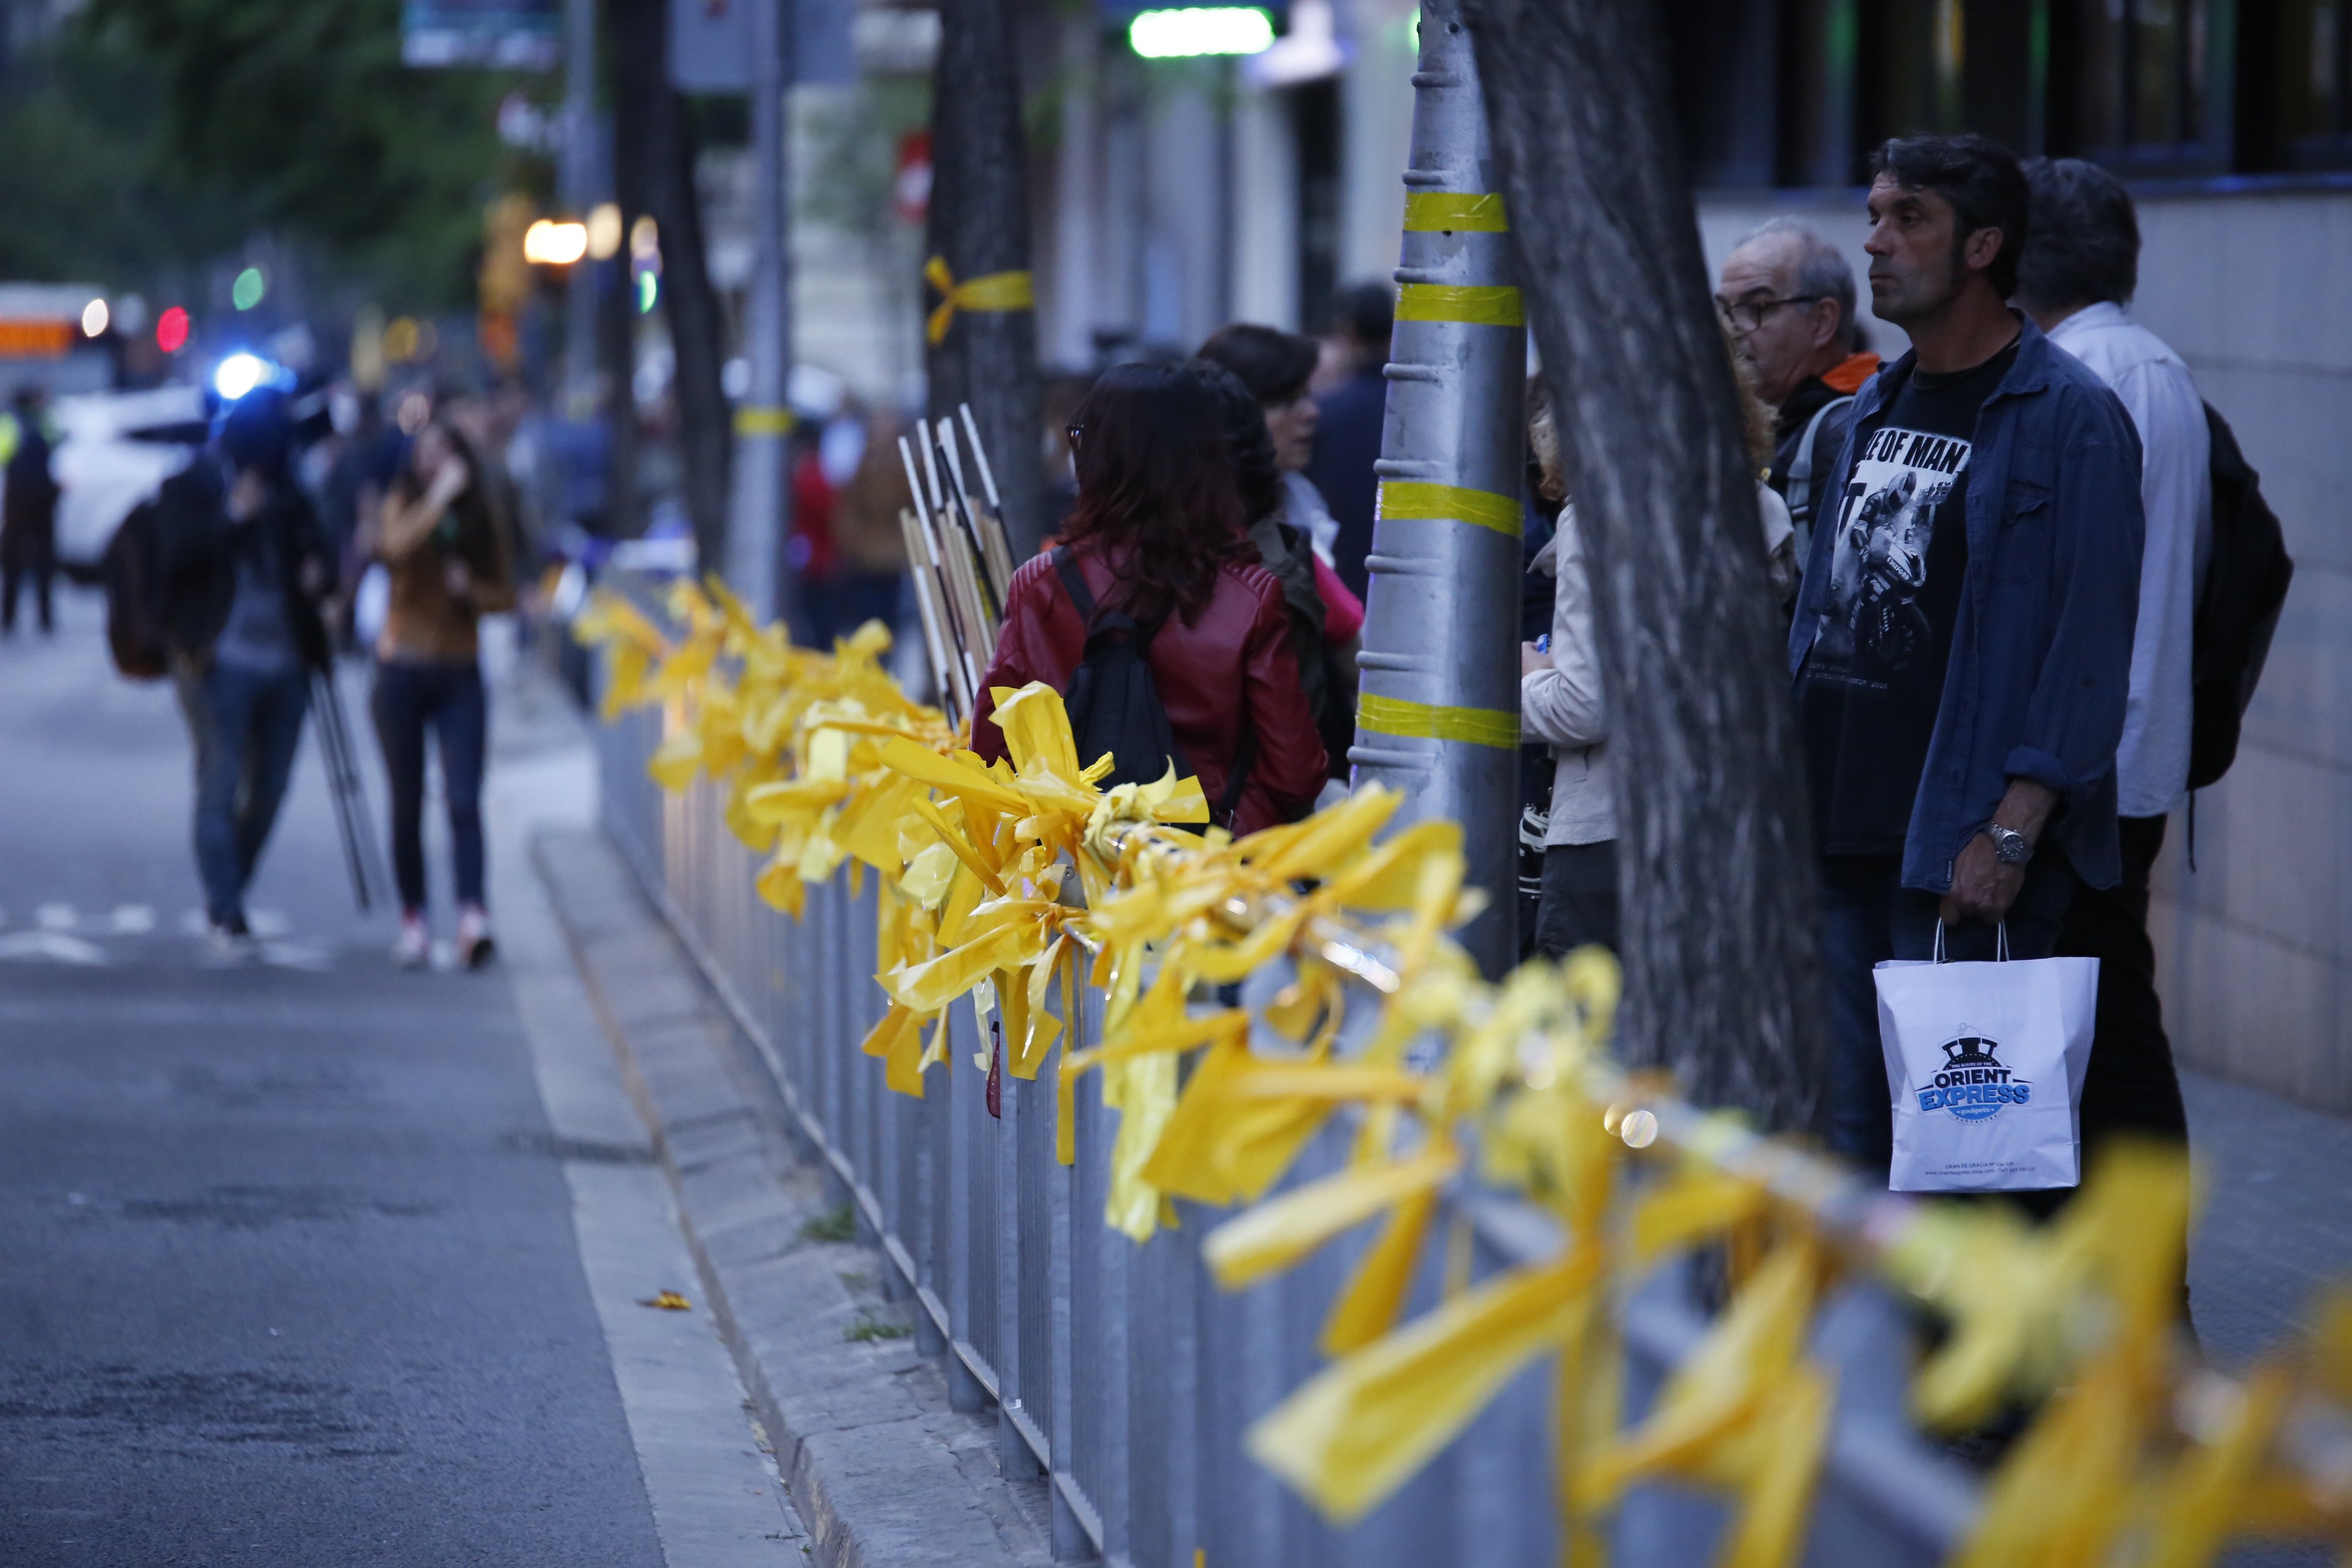 Spanish ombudsman calls on Catalan government to remove yellow loops from public buildings